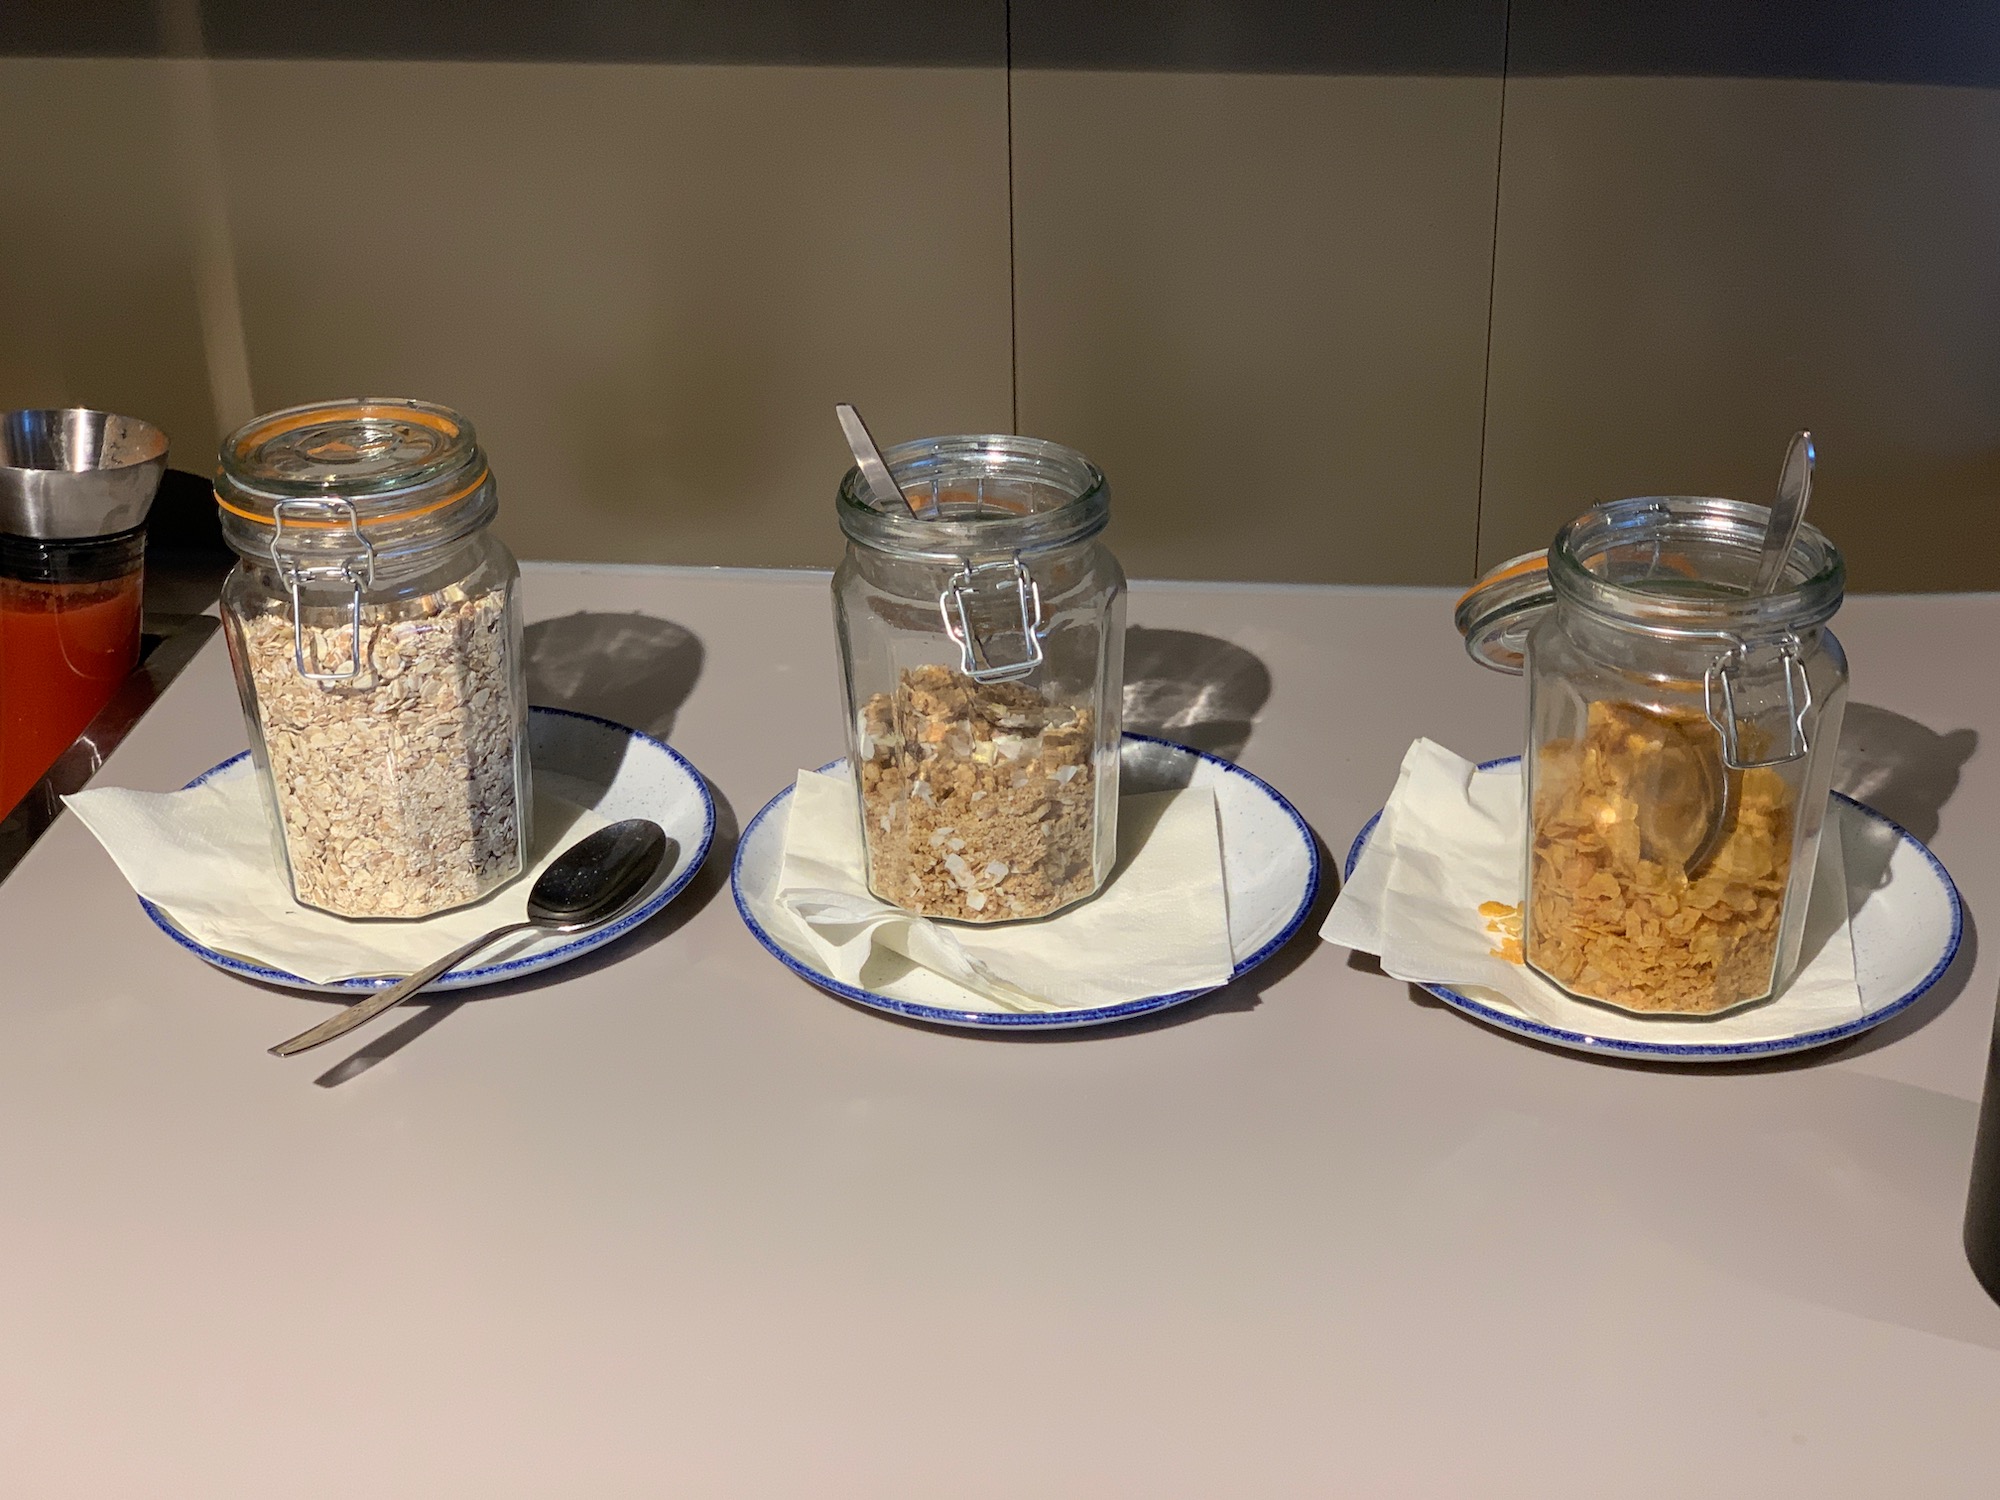 a group of jars of cereal and cereal on plates